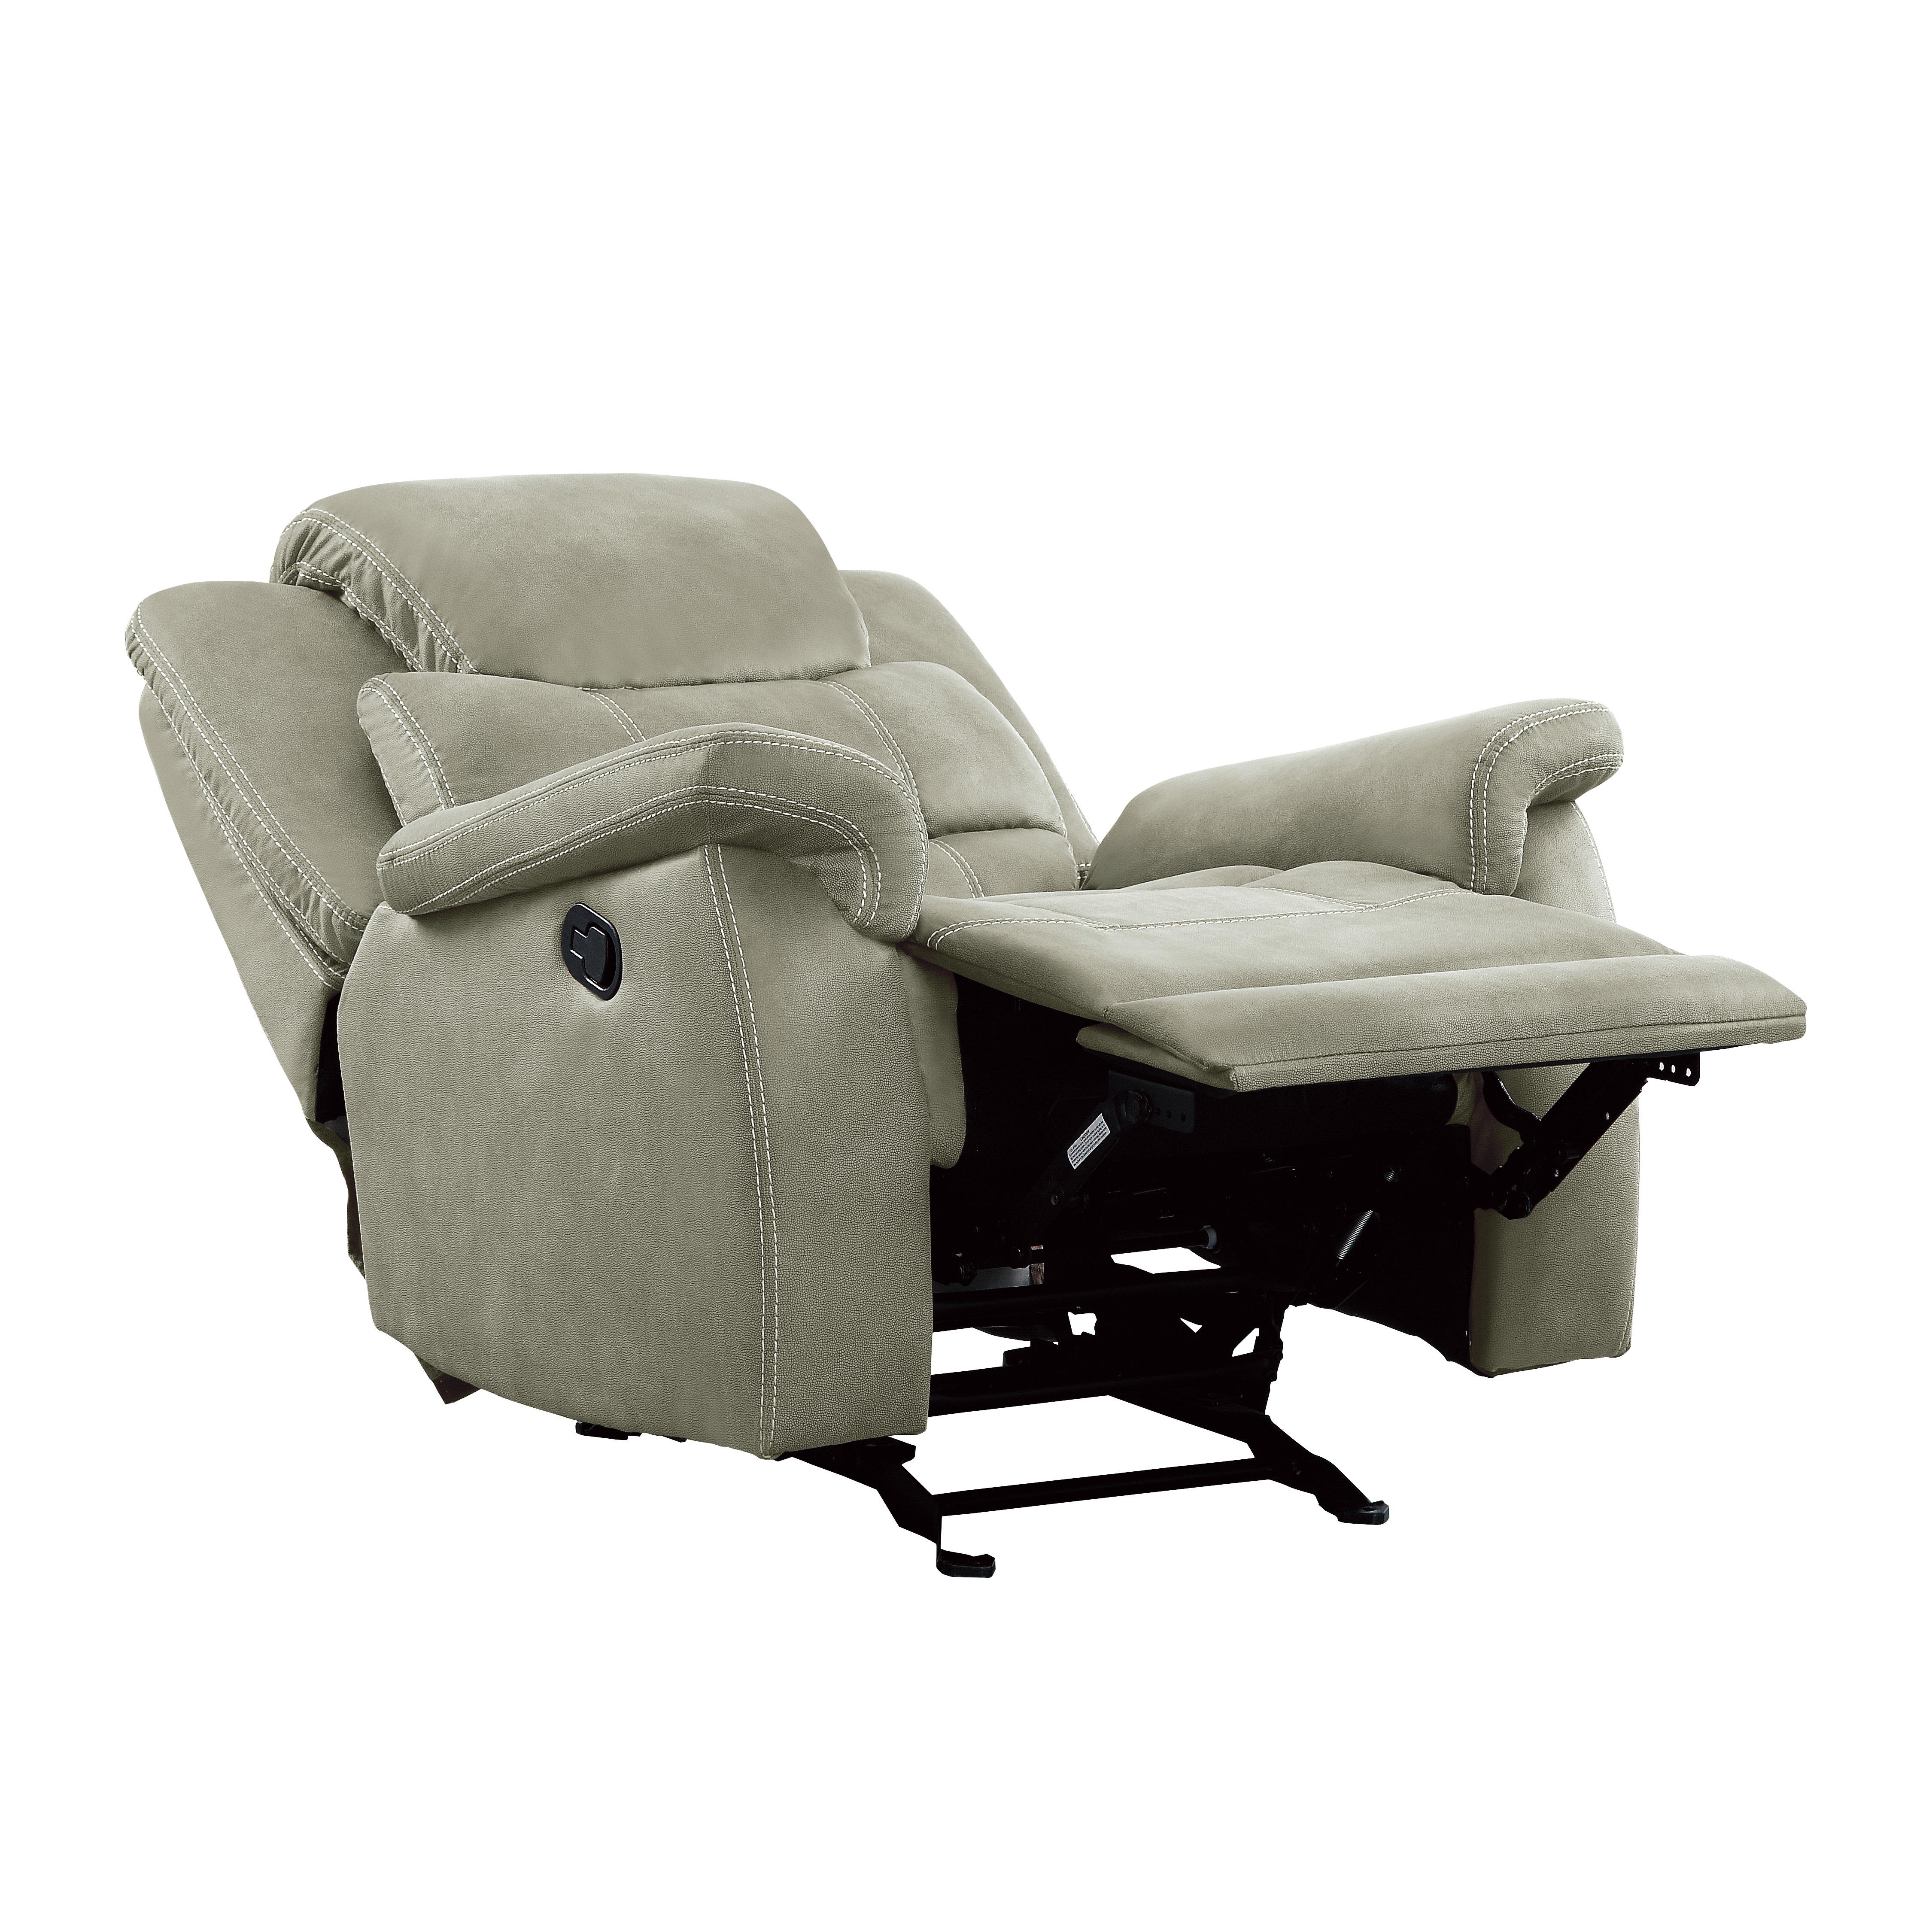 

    
Homelegance 9848GY-1 Shola Reclining Chair Gray 9848GY-1
